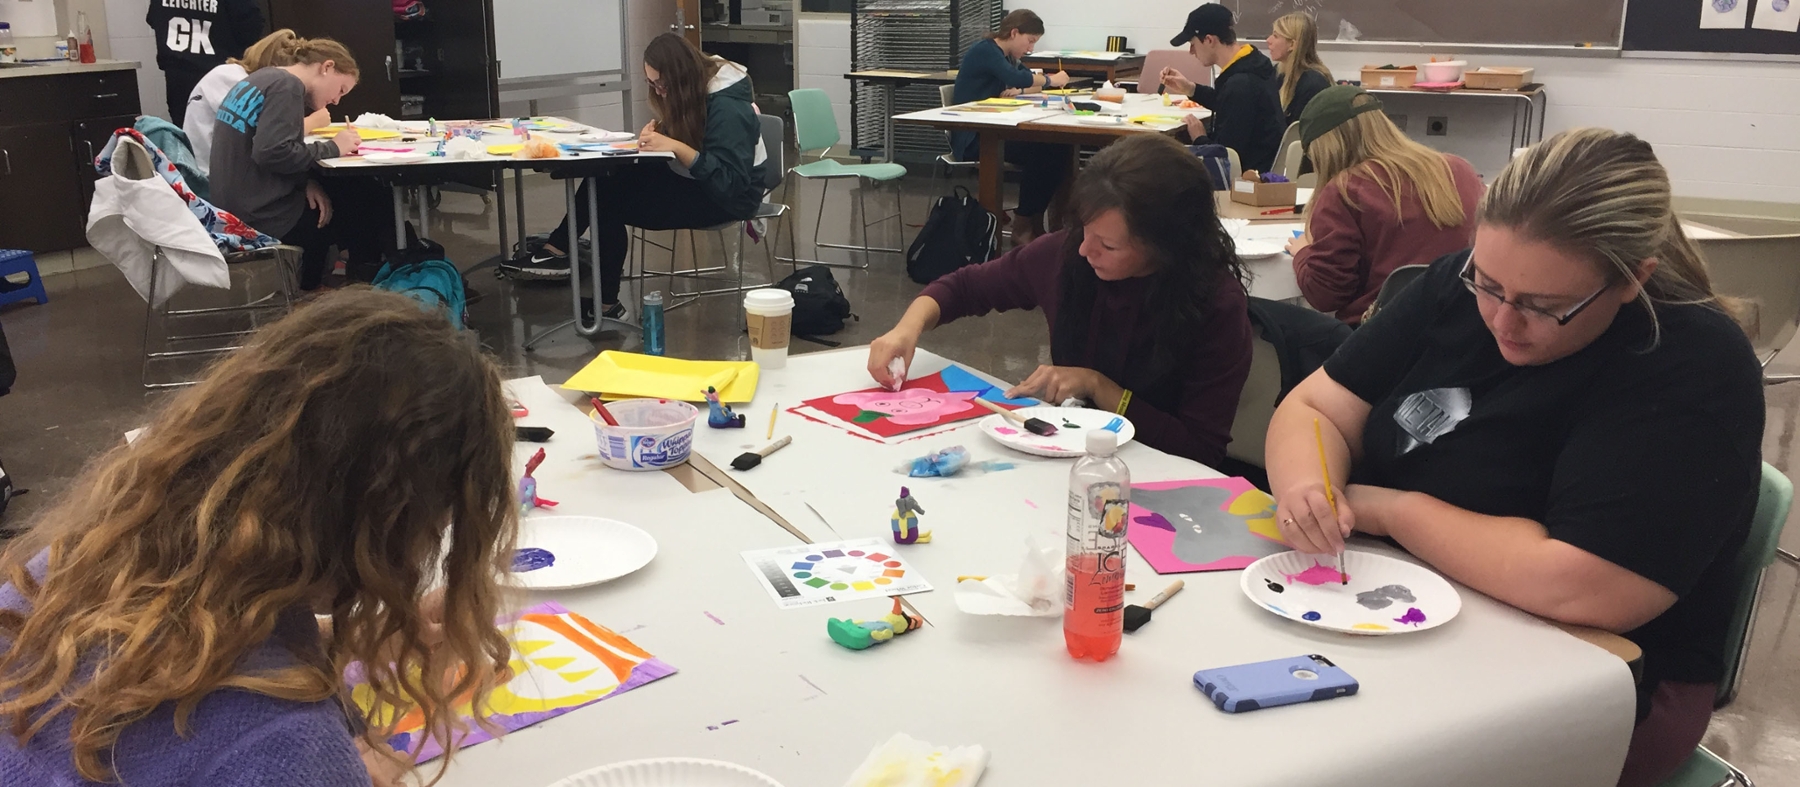 Student teachers and children work on art projects at tables